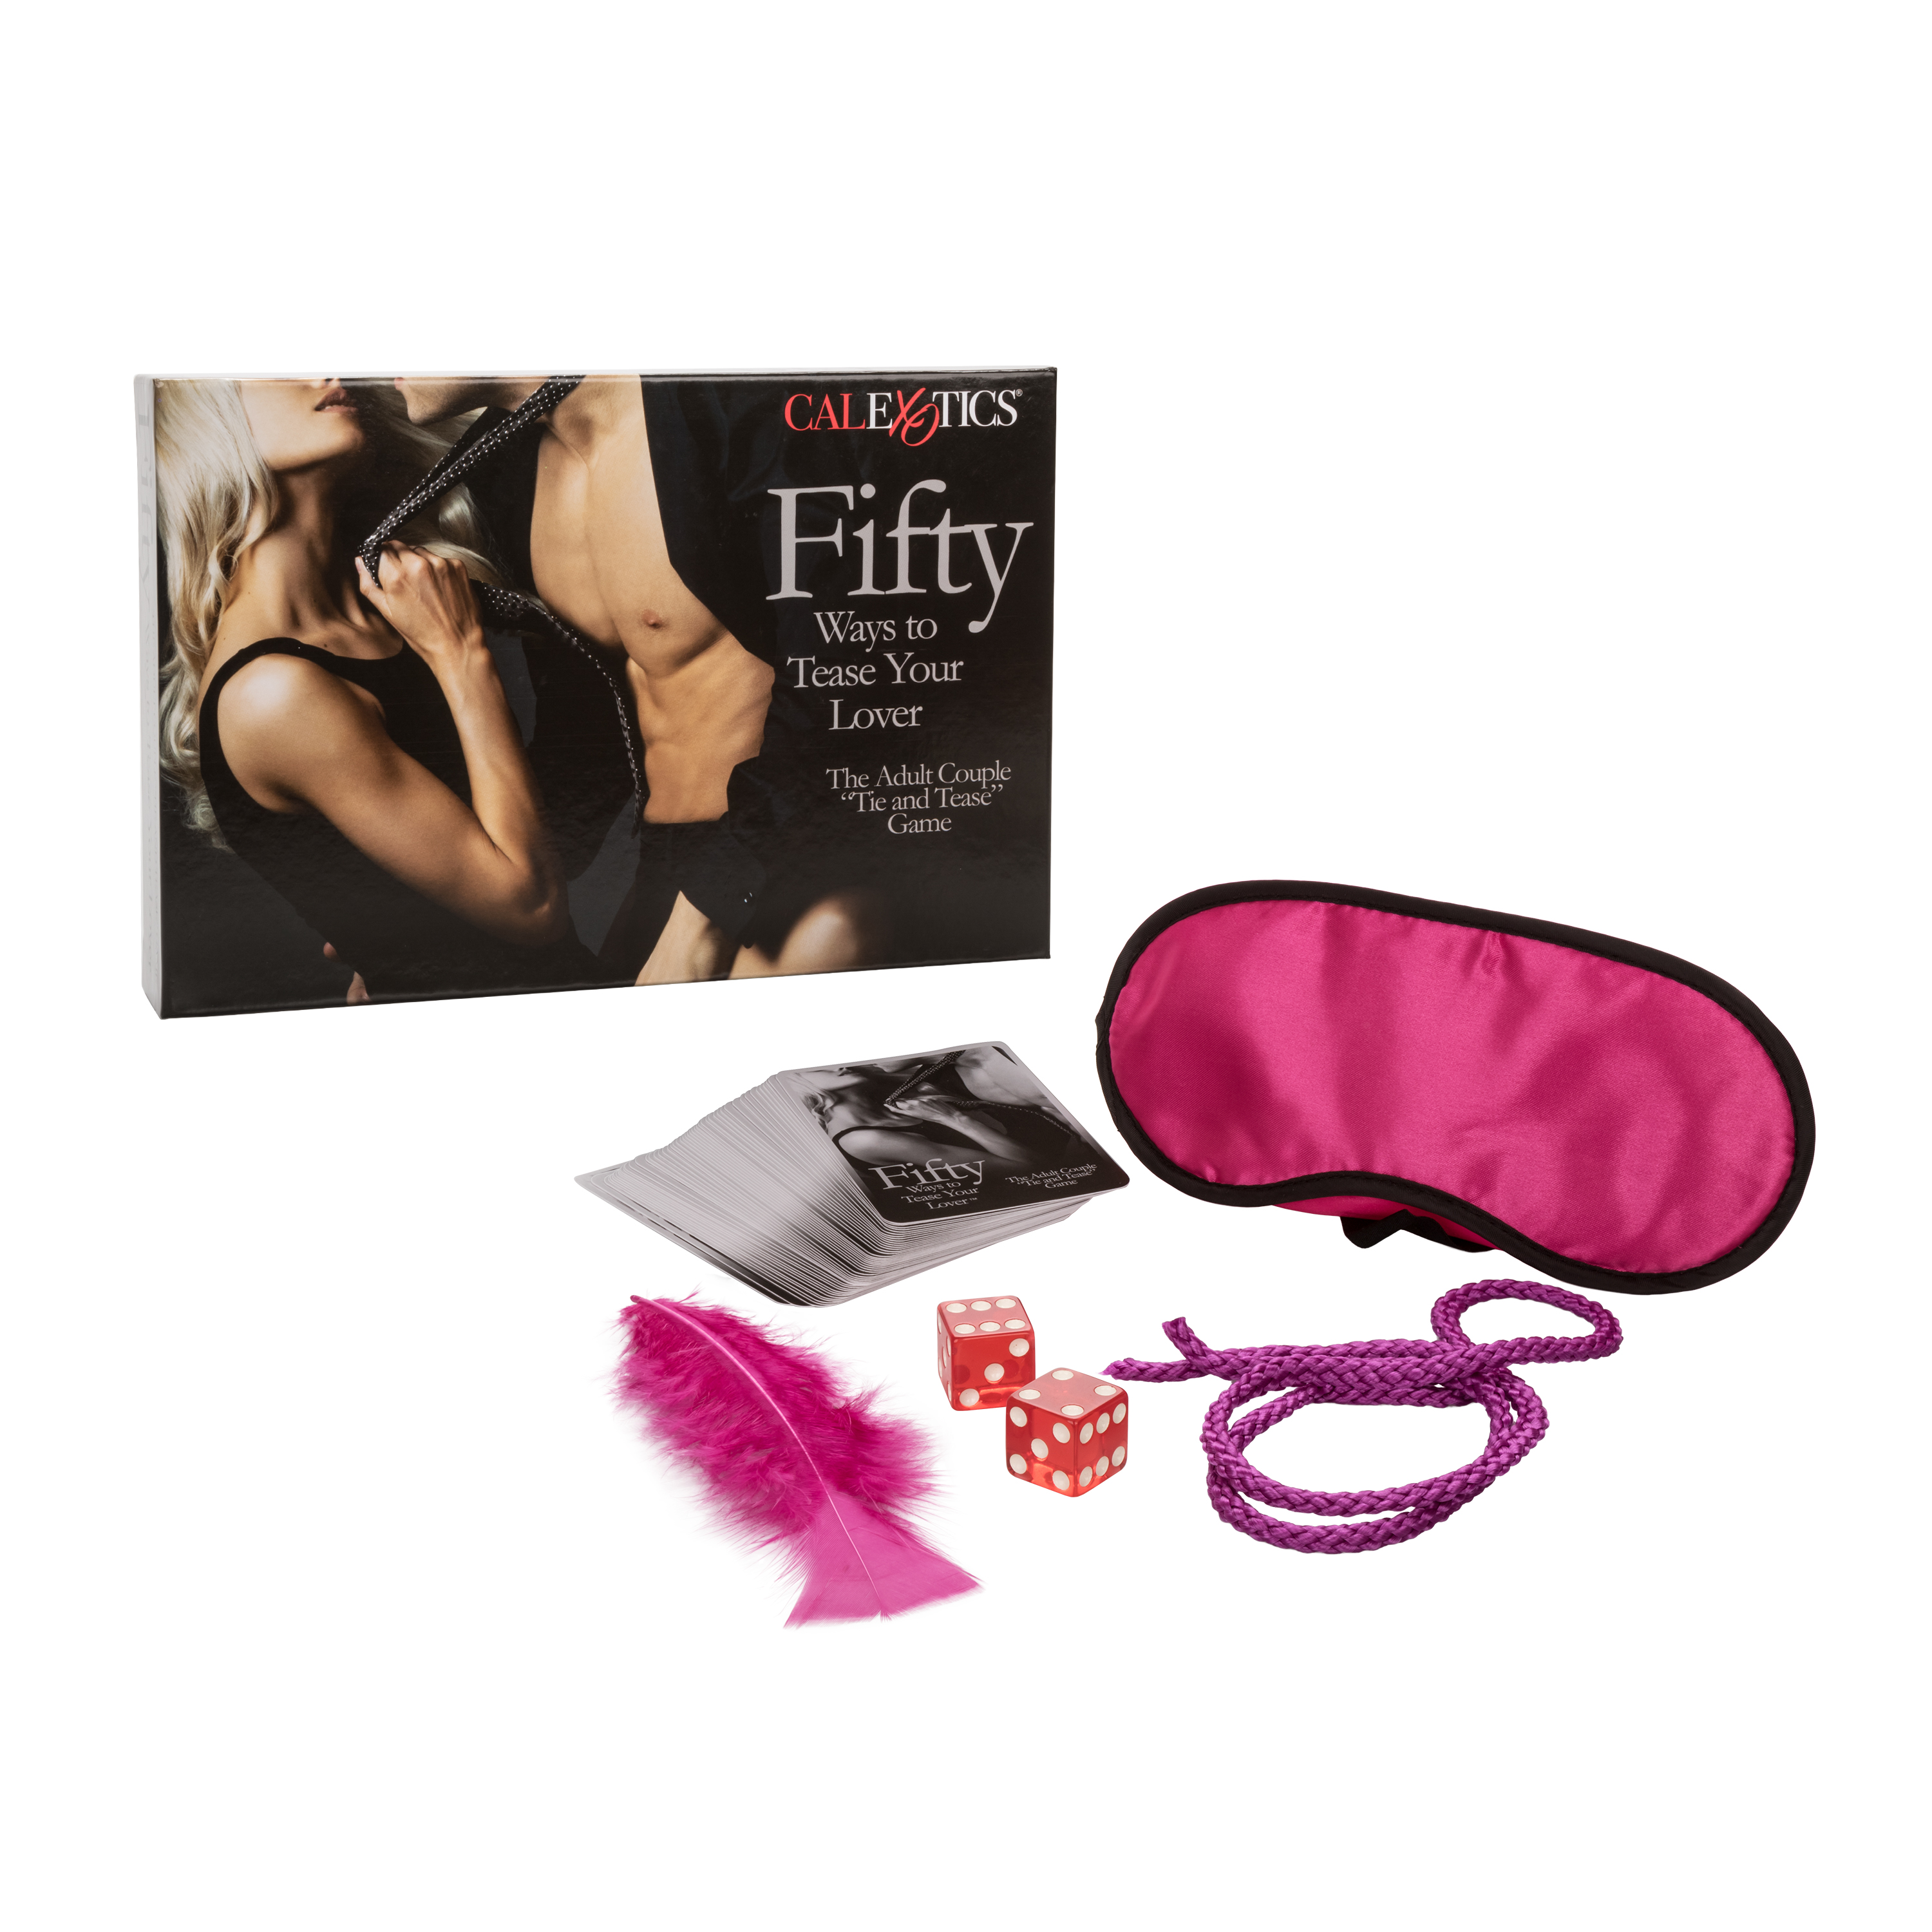 Fifty+Ways+To+Tease+Your+Lover+Tie+And+Tease+Game